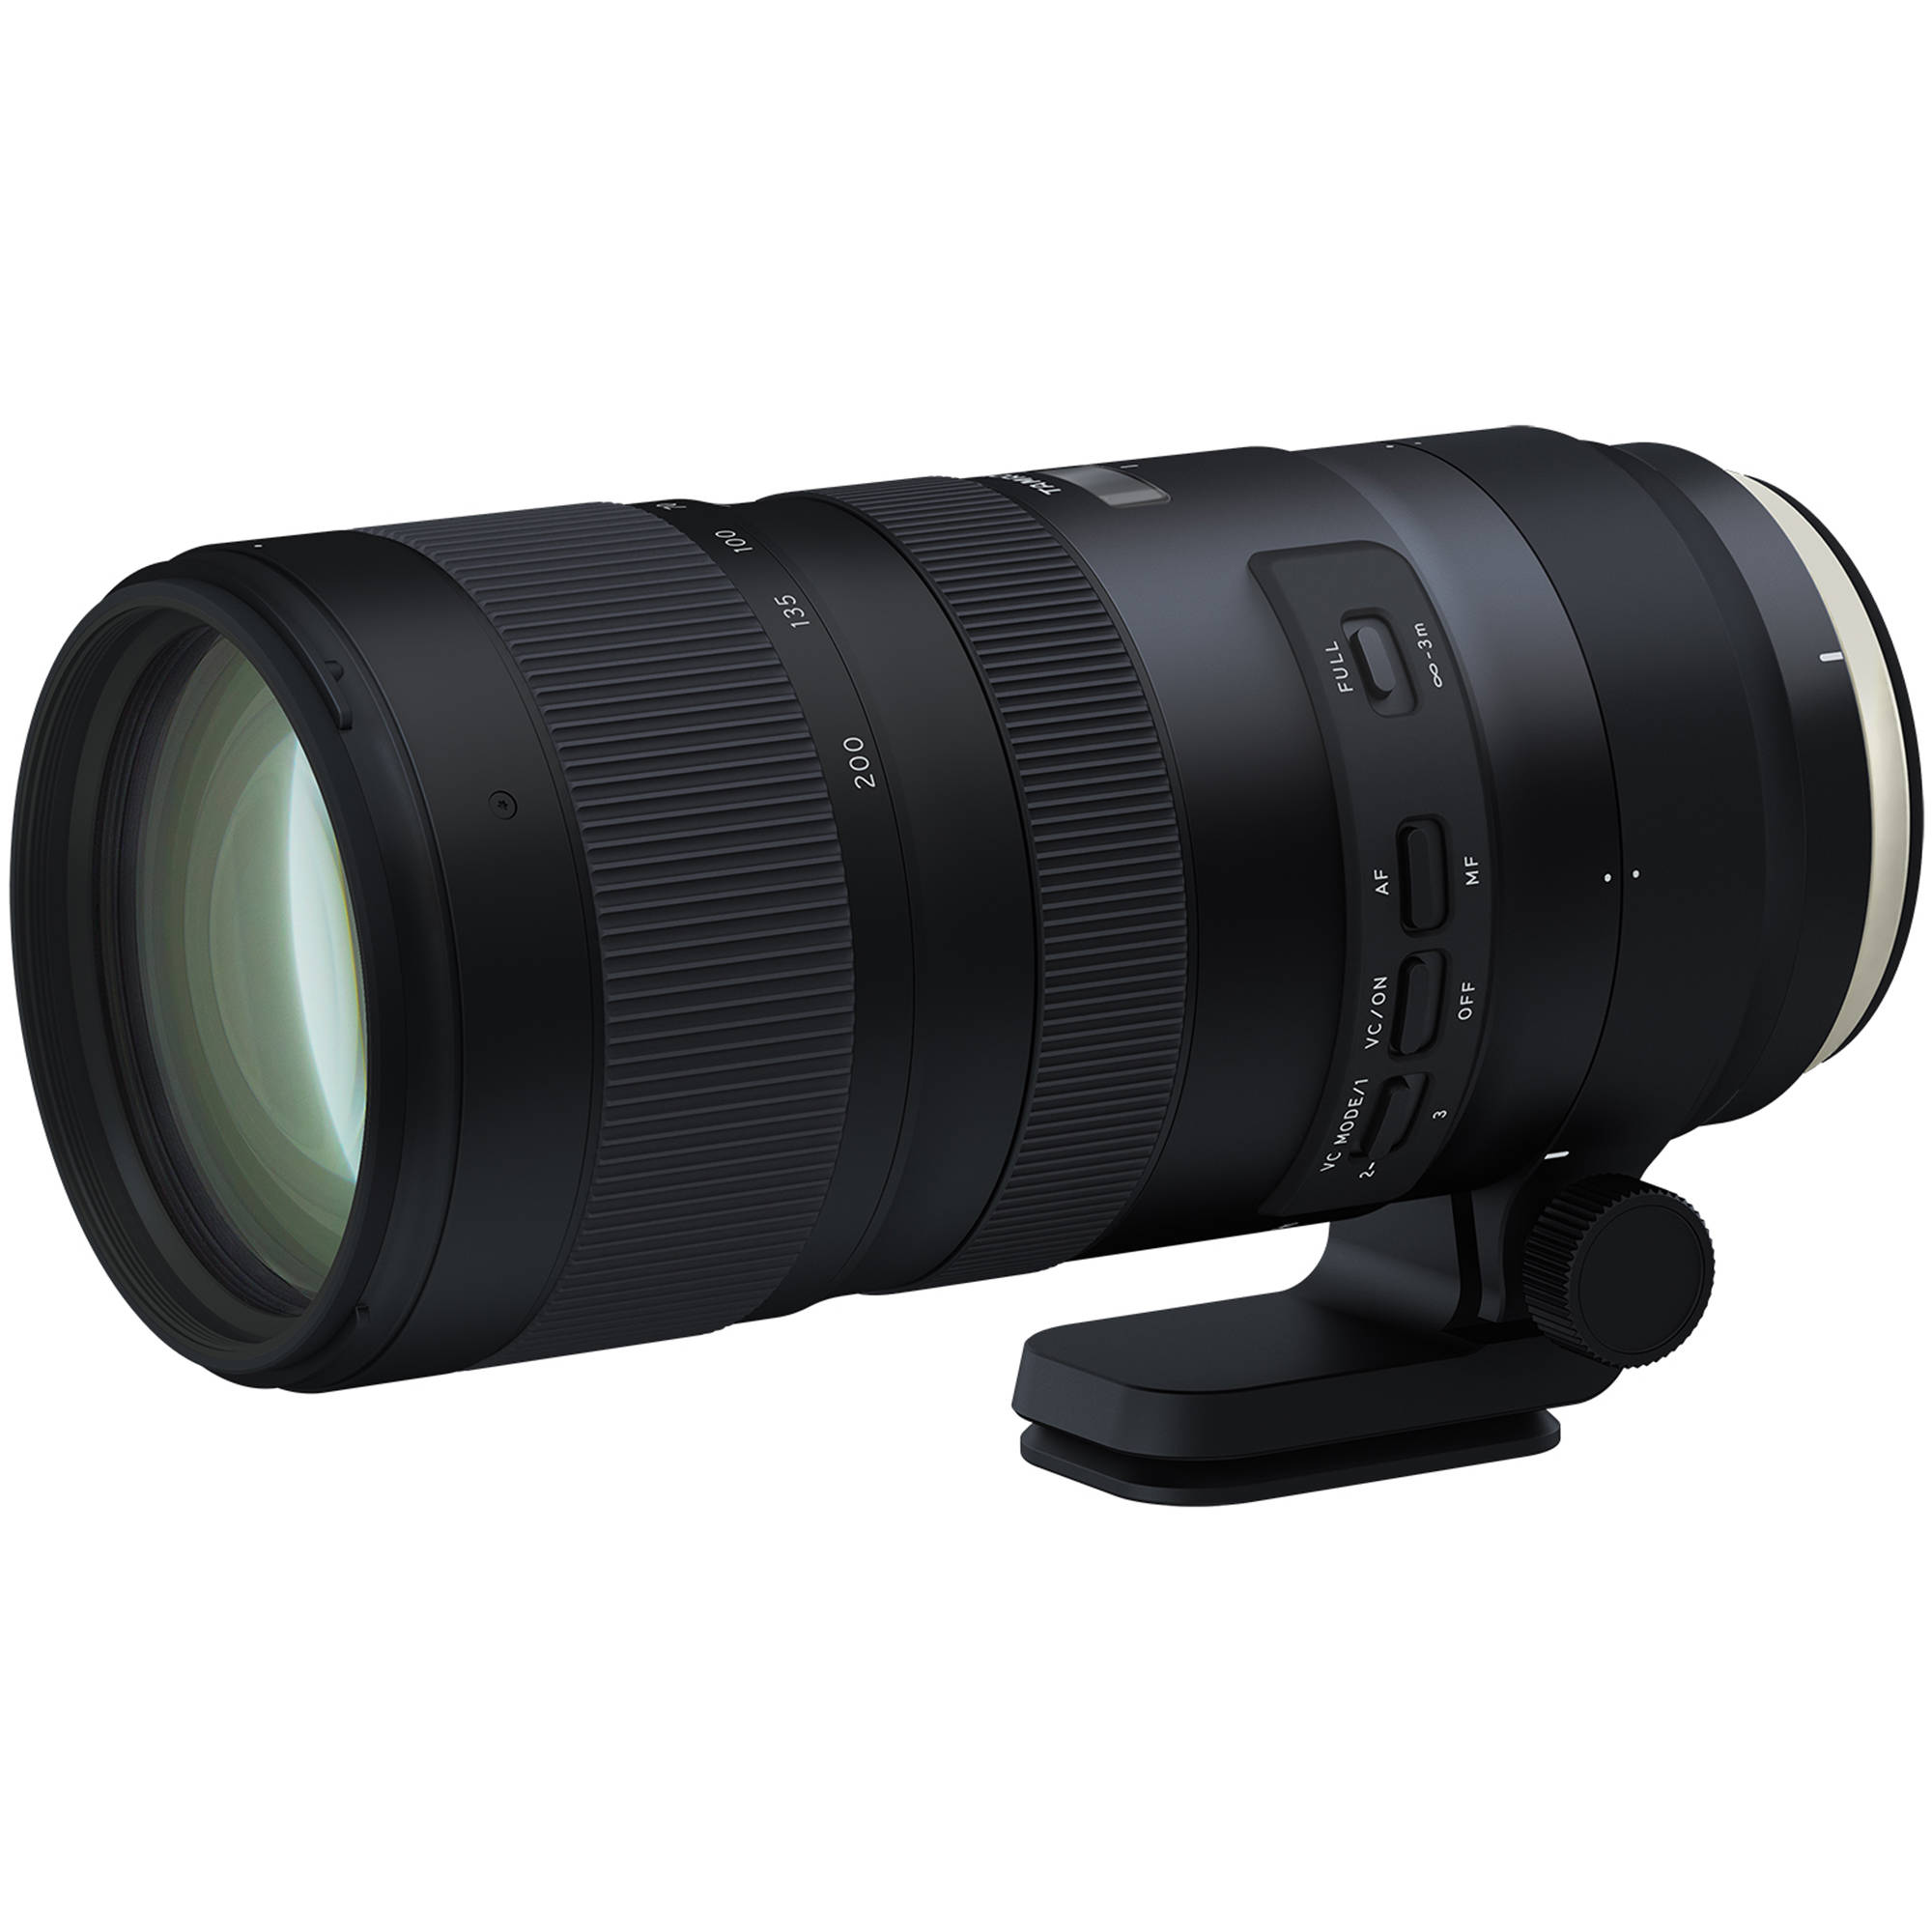 Tamron Sp 70 0mm F 2 8 Di Vc Usd G2 Lens For Can Afa025c 700